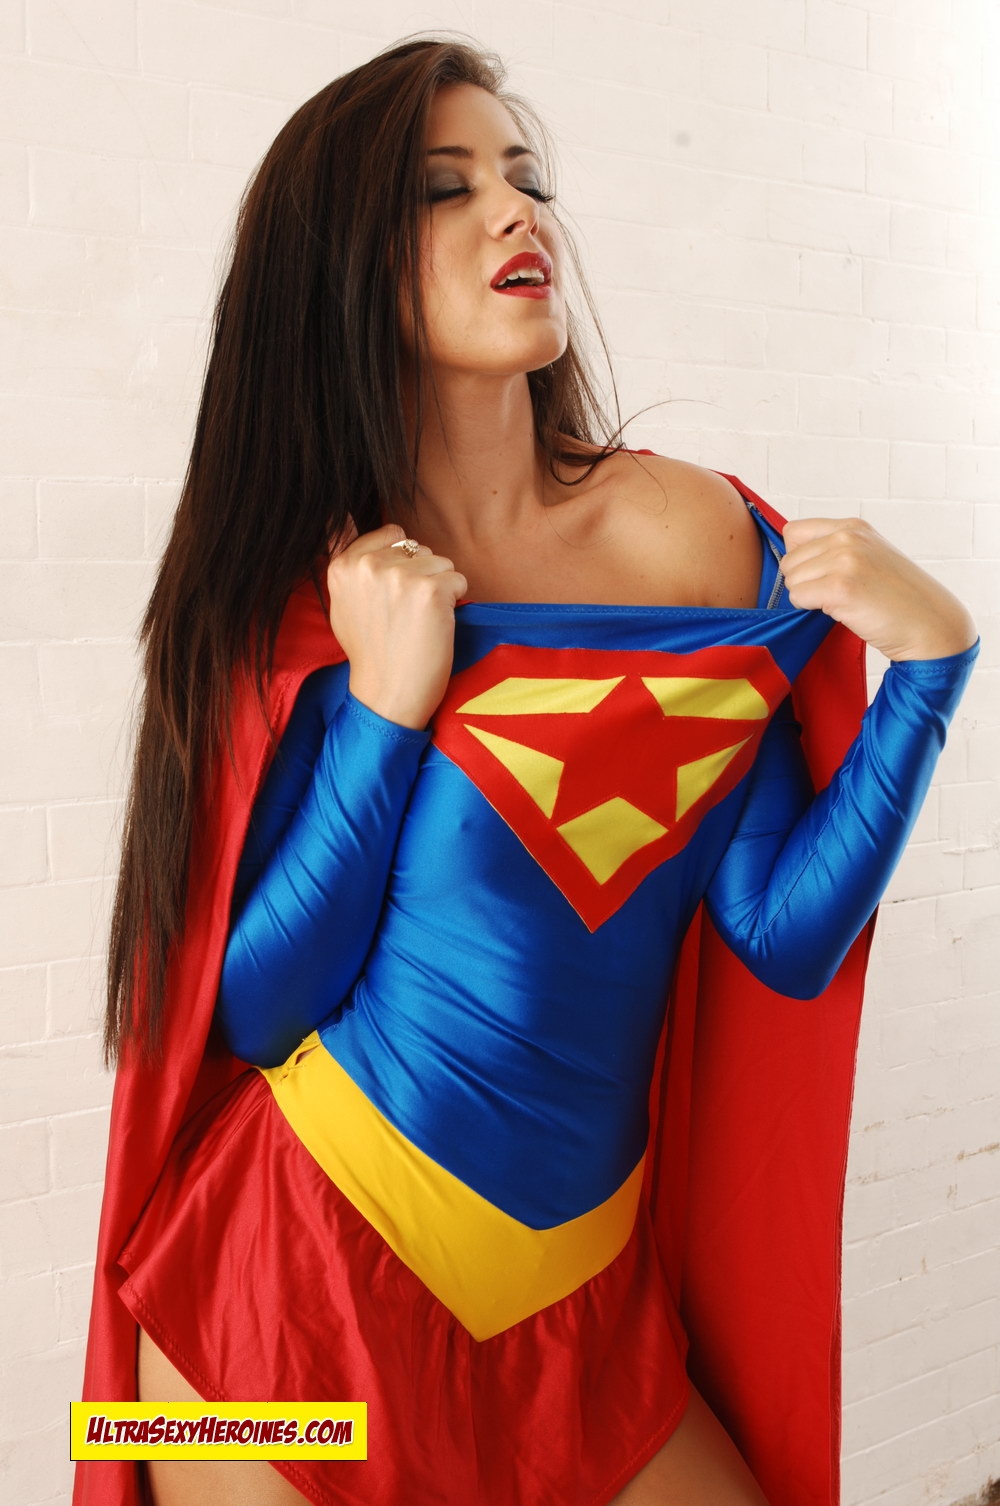 [UltraSexyHeroines] Super Heroine Cosplay Nude - Holly 89